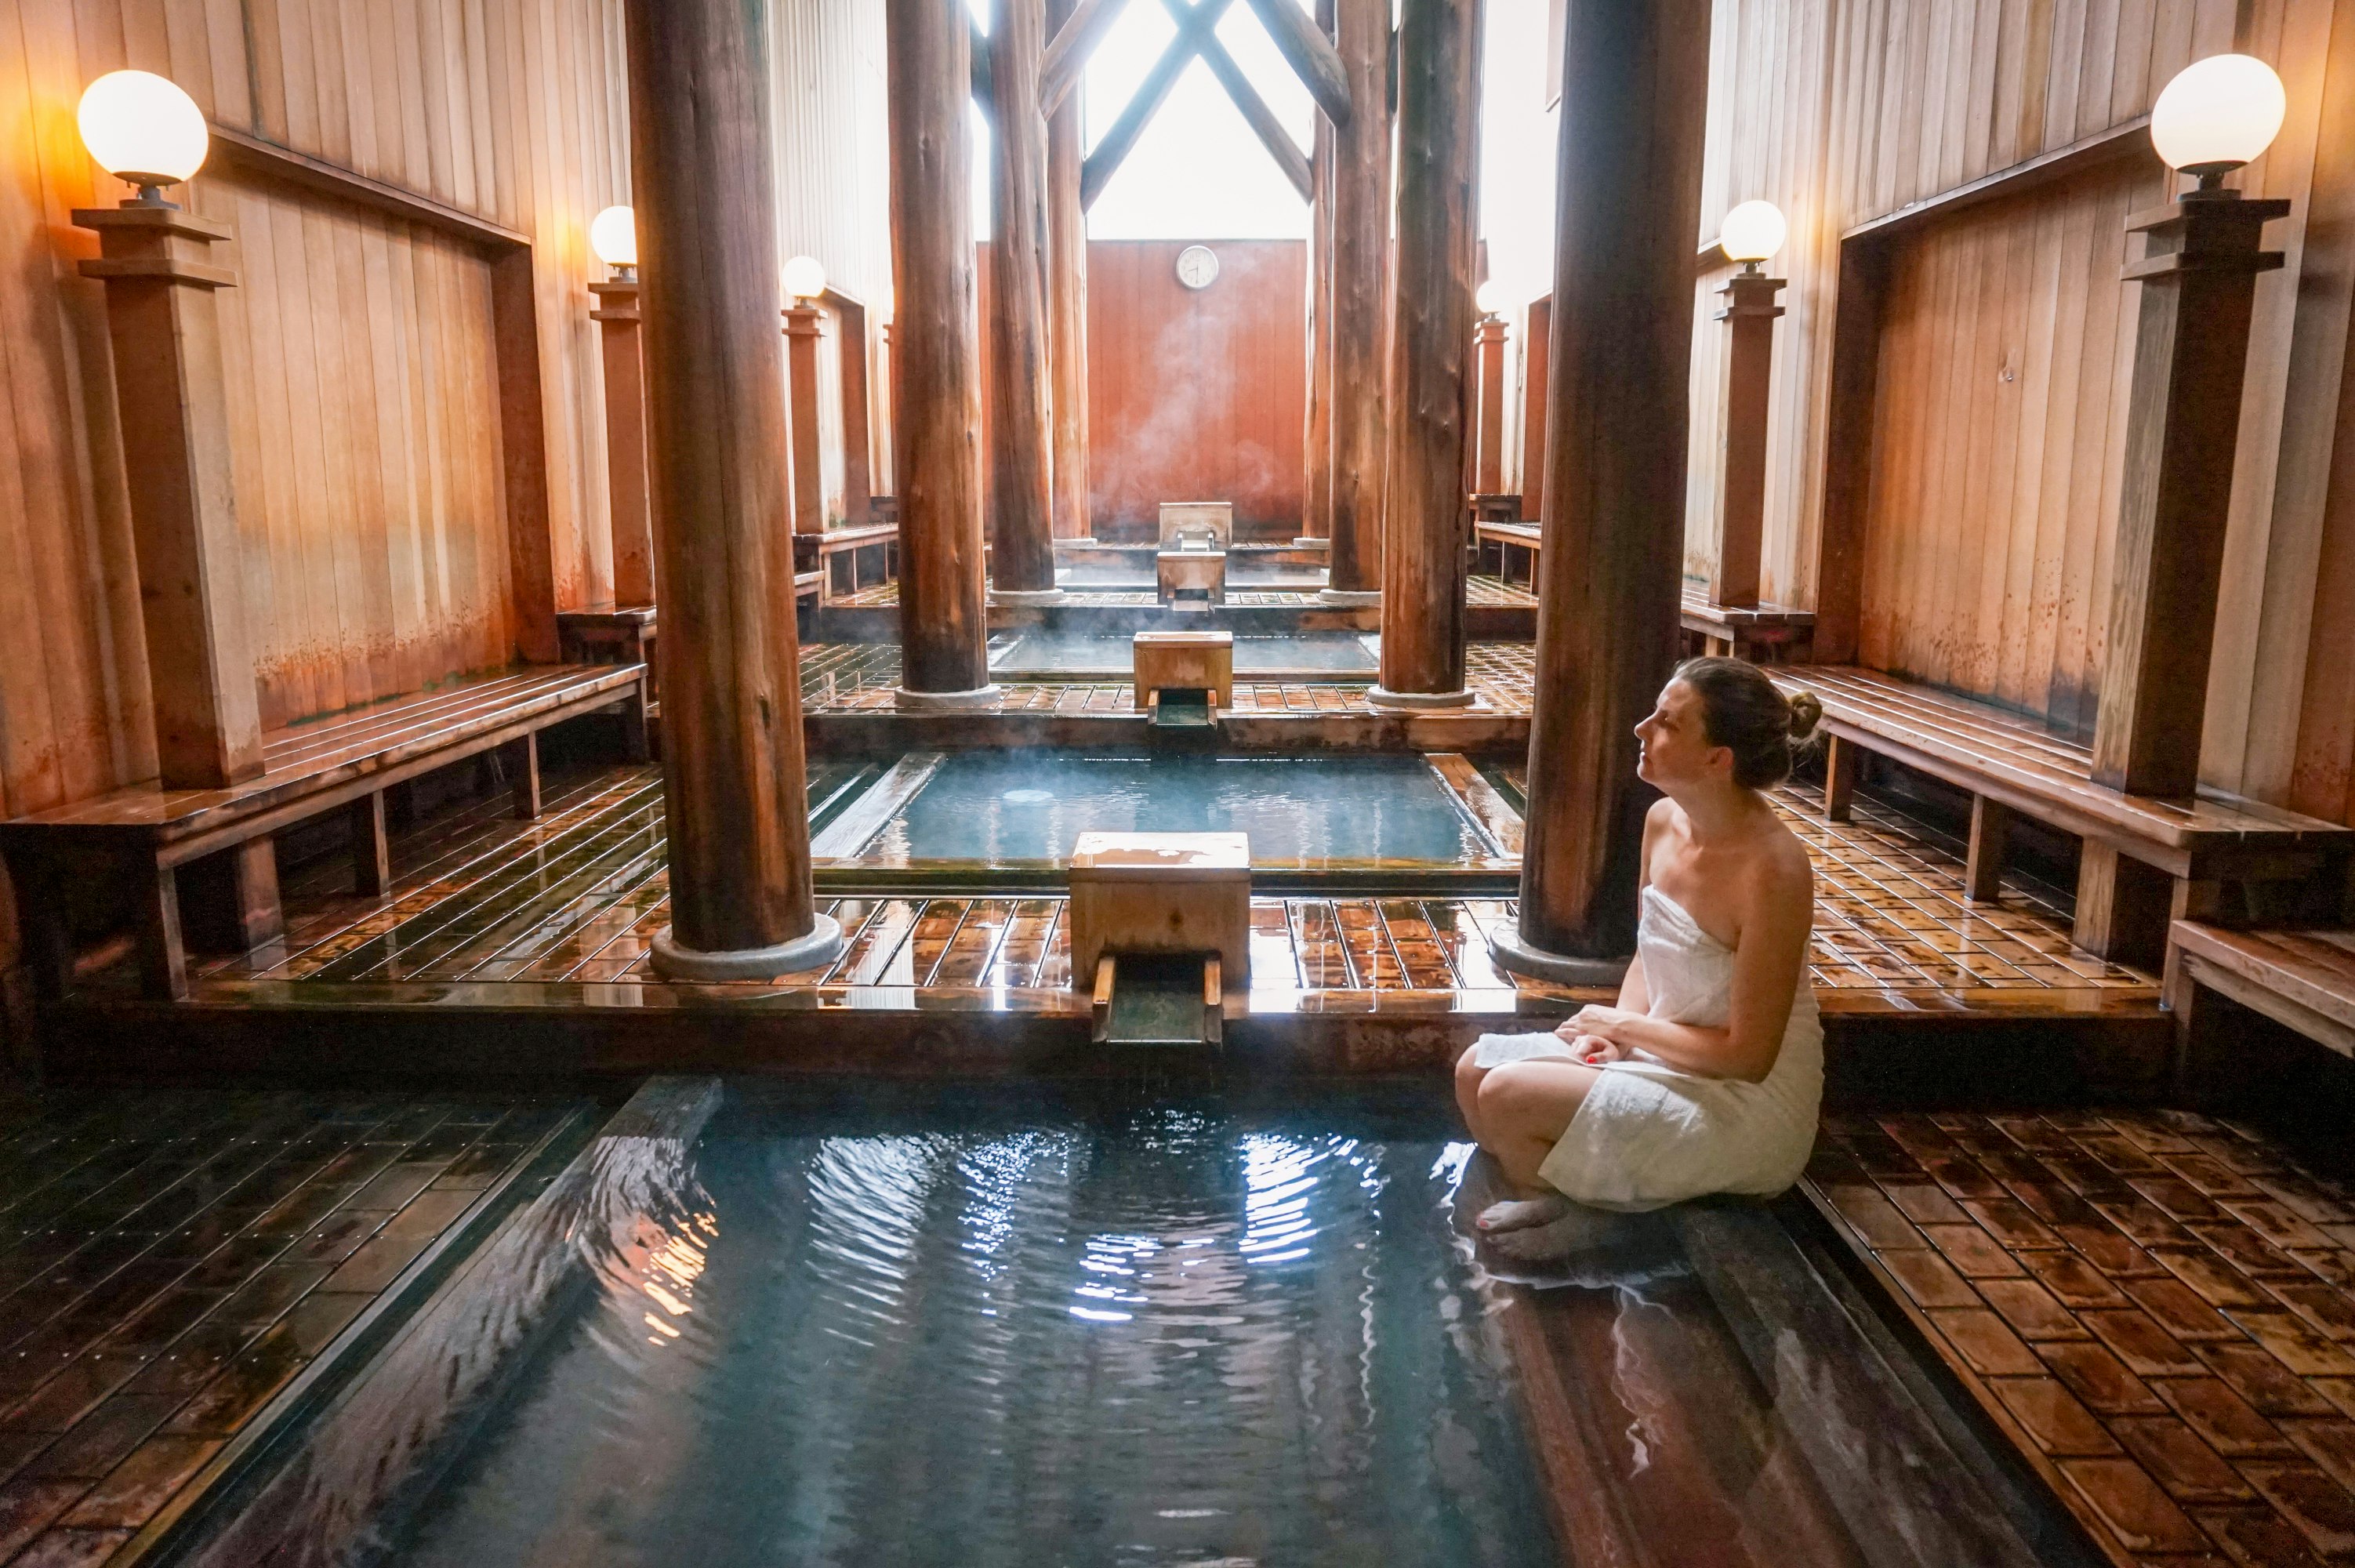 A woman wrapped in a towel sits with her feet in the water at an indoor bath surrounded by wooden walls and posts